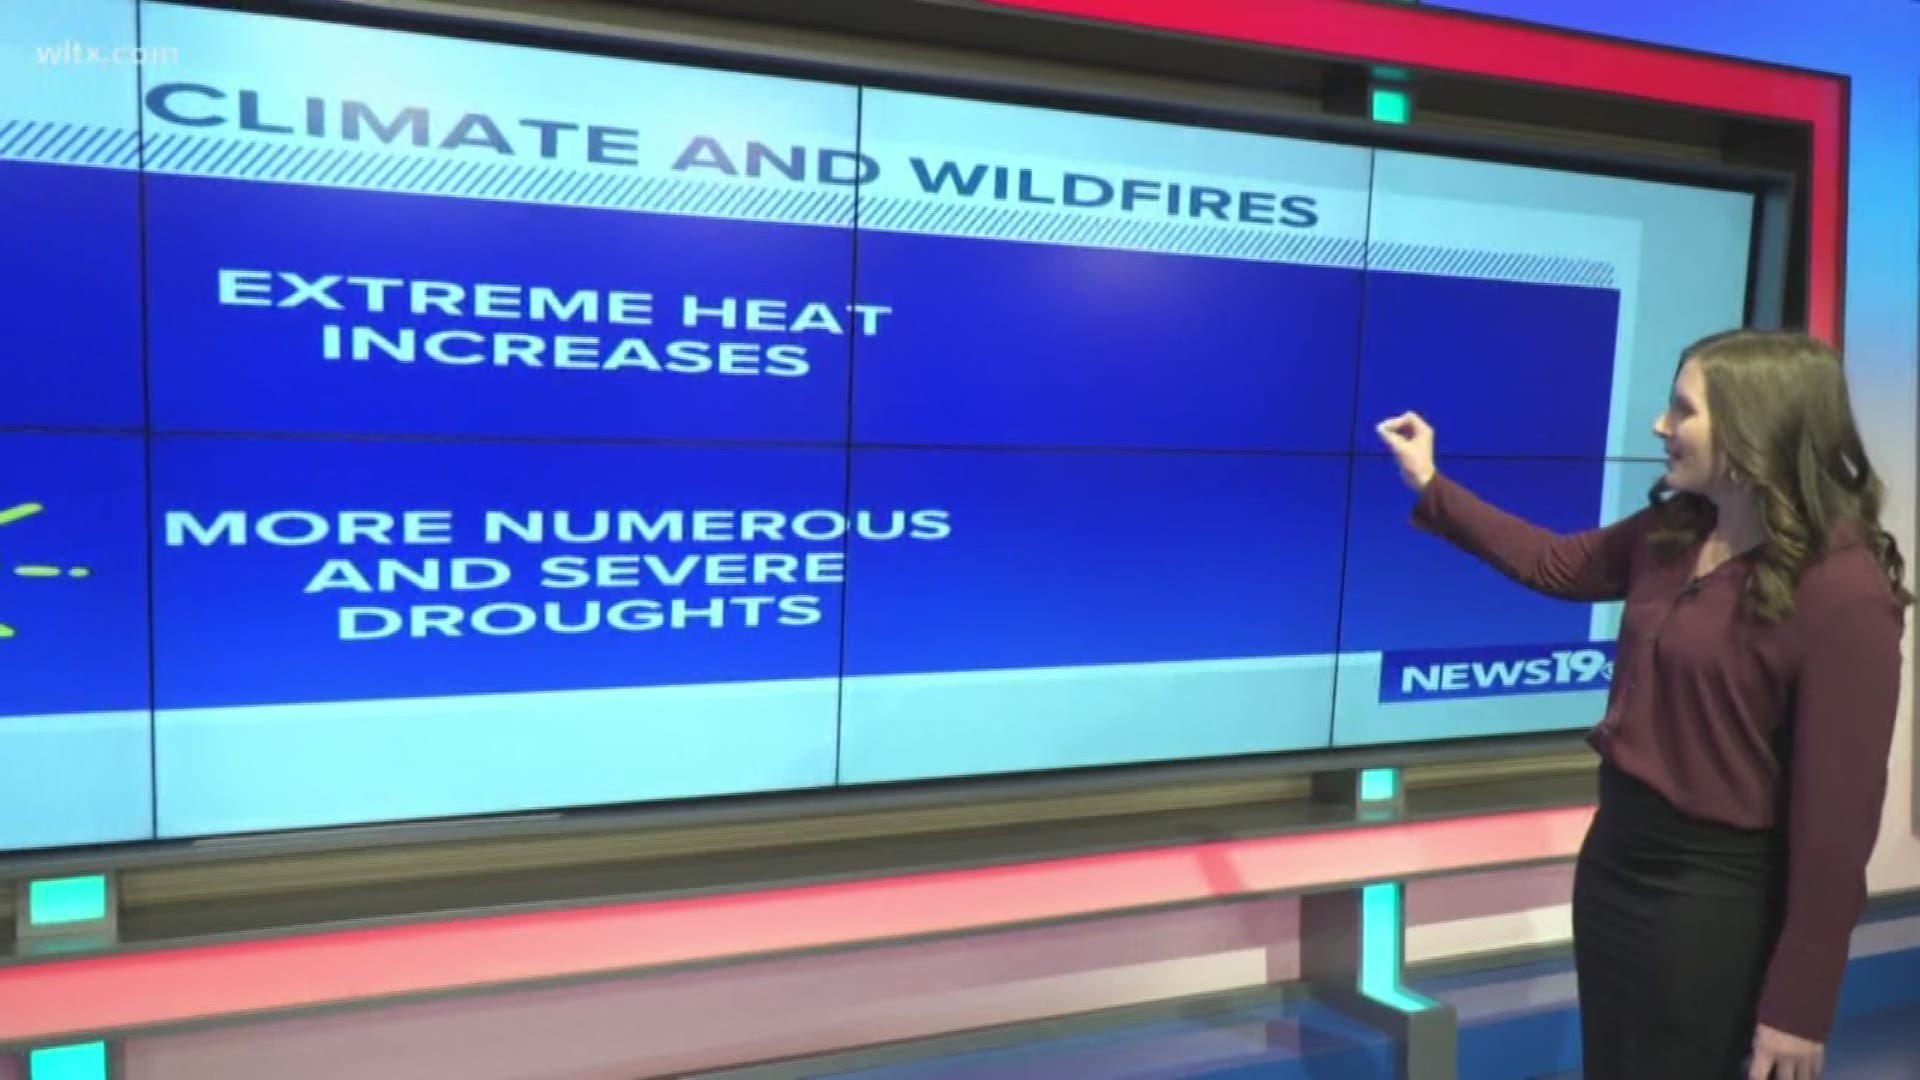 With the devastating fires affecting Australia, meteorologist Danielle Miller takes a look at how climate change is making wildfire season worse around the world.